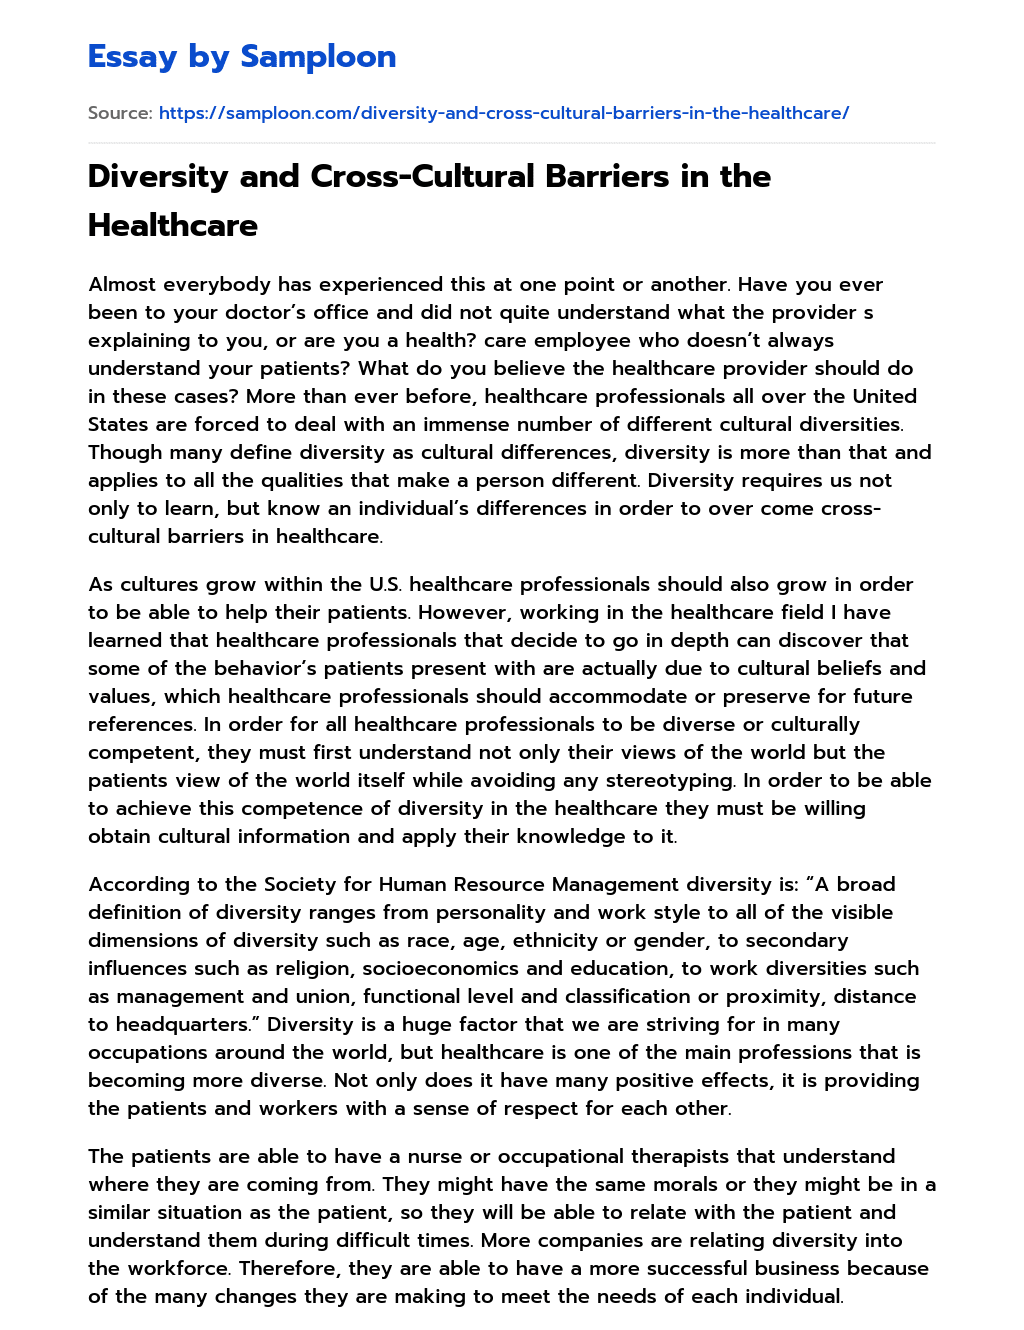 Diversity and Cross-Cultural Barriers in the Healthcare essay